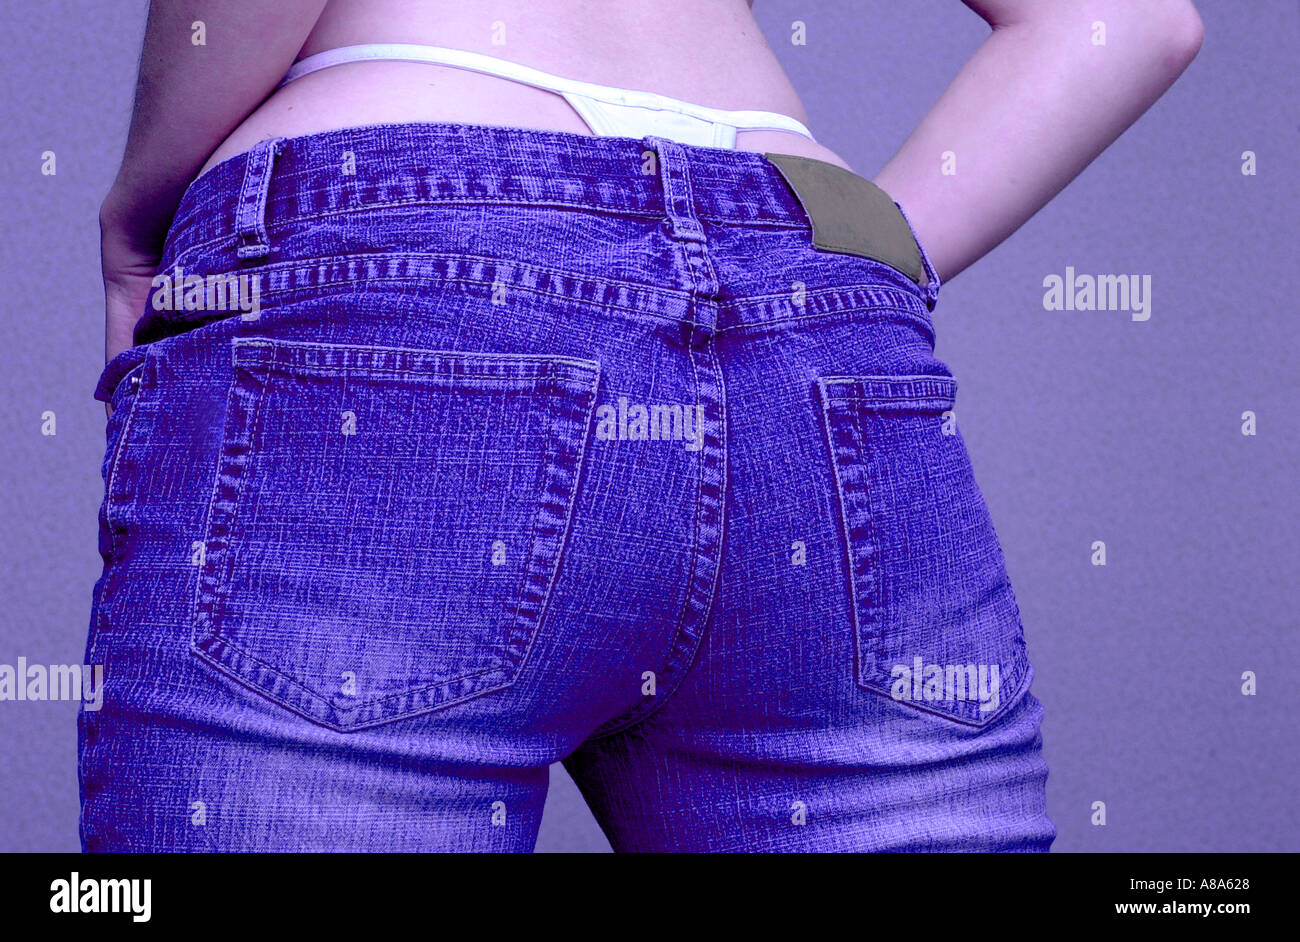 https://c8.alamy.com/comp/A8A628/woman-in-jeans-with-thong-panties-showing-above-pants-A8A628.jpg